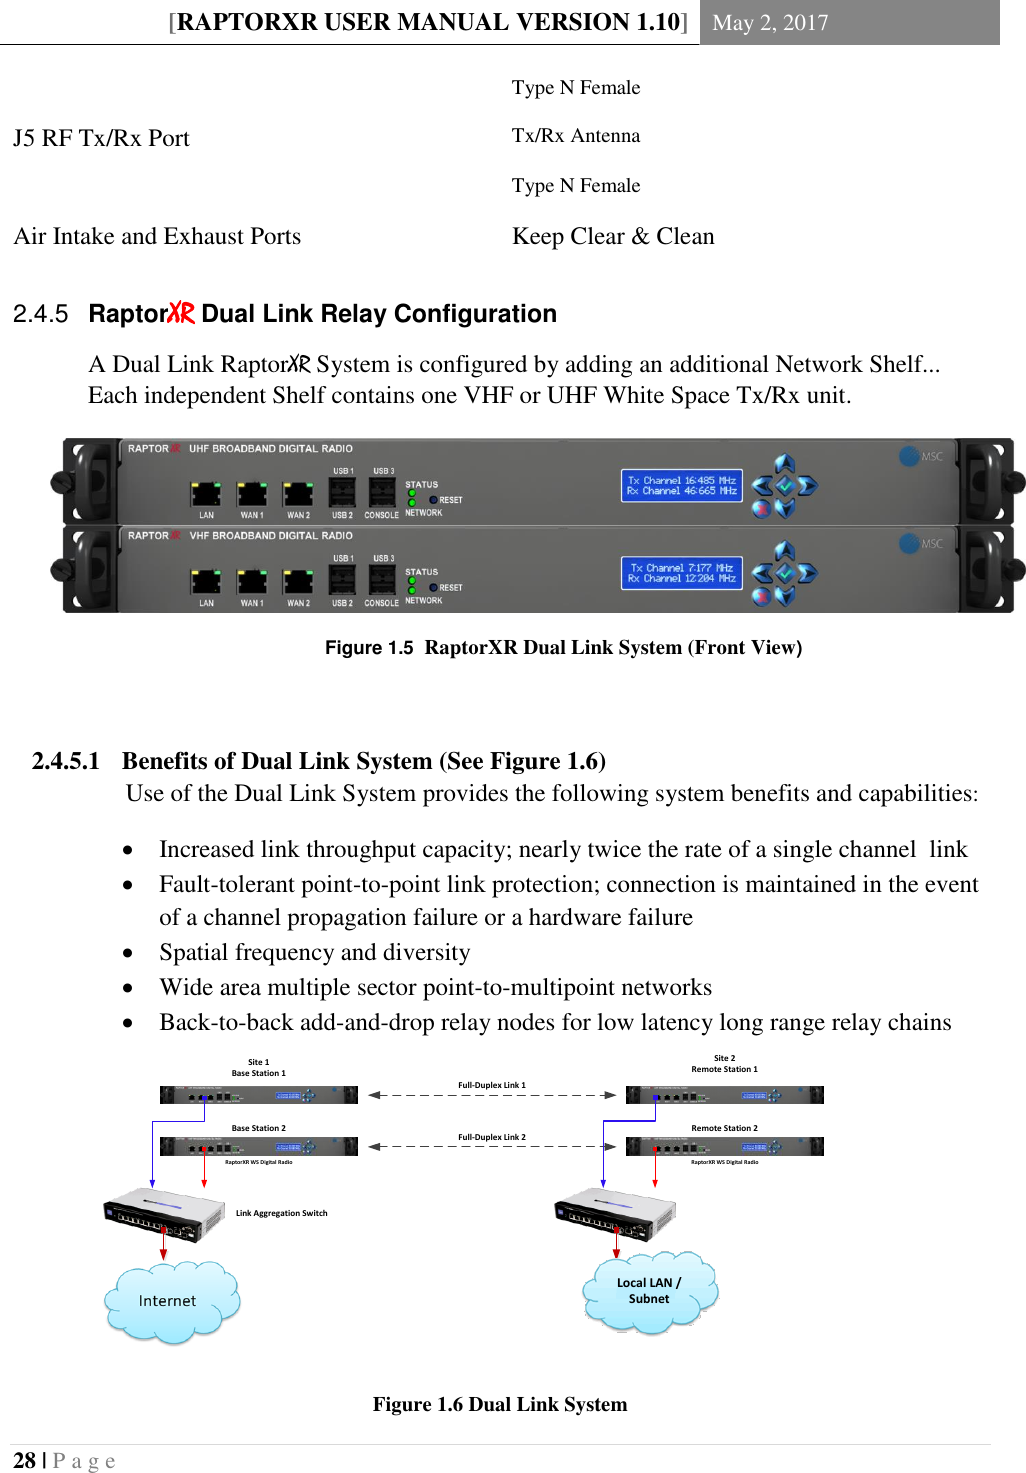 [RAPTORXR USER MANUAL VERSION 1.10] May 2, 2017  28 | P a g e    RaptorXR Dual Link Relay Configuration  2.4.5A Dual Link RaptorXR System is configured by adding an additional Network Shelf...  Each independent Shelf contains one VHF or UHF White Space Tx/Rx unit.      2.4.5.1 Benefits of Dual Link System (See Figure 1.6) Use of the Dual Link System provides the following system benefits and capabilities:  Increased link throughput capacity; nearly twice the rate of a single channel  link  Fault-tolerant point-to-point link protection; connection is maintained in the event of a channel propagation failure or a hardware failure  Spatial frequency and diversity  Wide area multiple sector point-to-multipoint networks  Back-to-back add-and-drop relay nodes for low latency long range relay chains           Figure 1.6 Dual Link System   Type N Female J5 RF Tx/Rx Port Tx/Rx Antenna Type N Female Air Intake and Exhaust Ports Keep Clear &amp; Clean Figure 1.5  RaptorXR Dual Link System (Front View) Full-Duplex Link 1Full-Duplex Link 2RaptorXR WS Digital Radio Site 1Base Station 1RaptorXR WS Digital Radio Site 2Remote Station 1  Local LAN / SubnetRemote Station 2Base Station 2Link Aggregation Switch